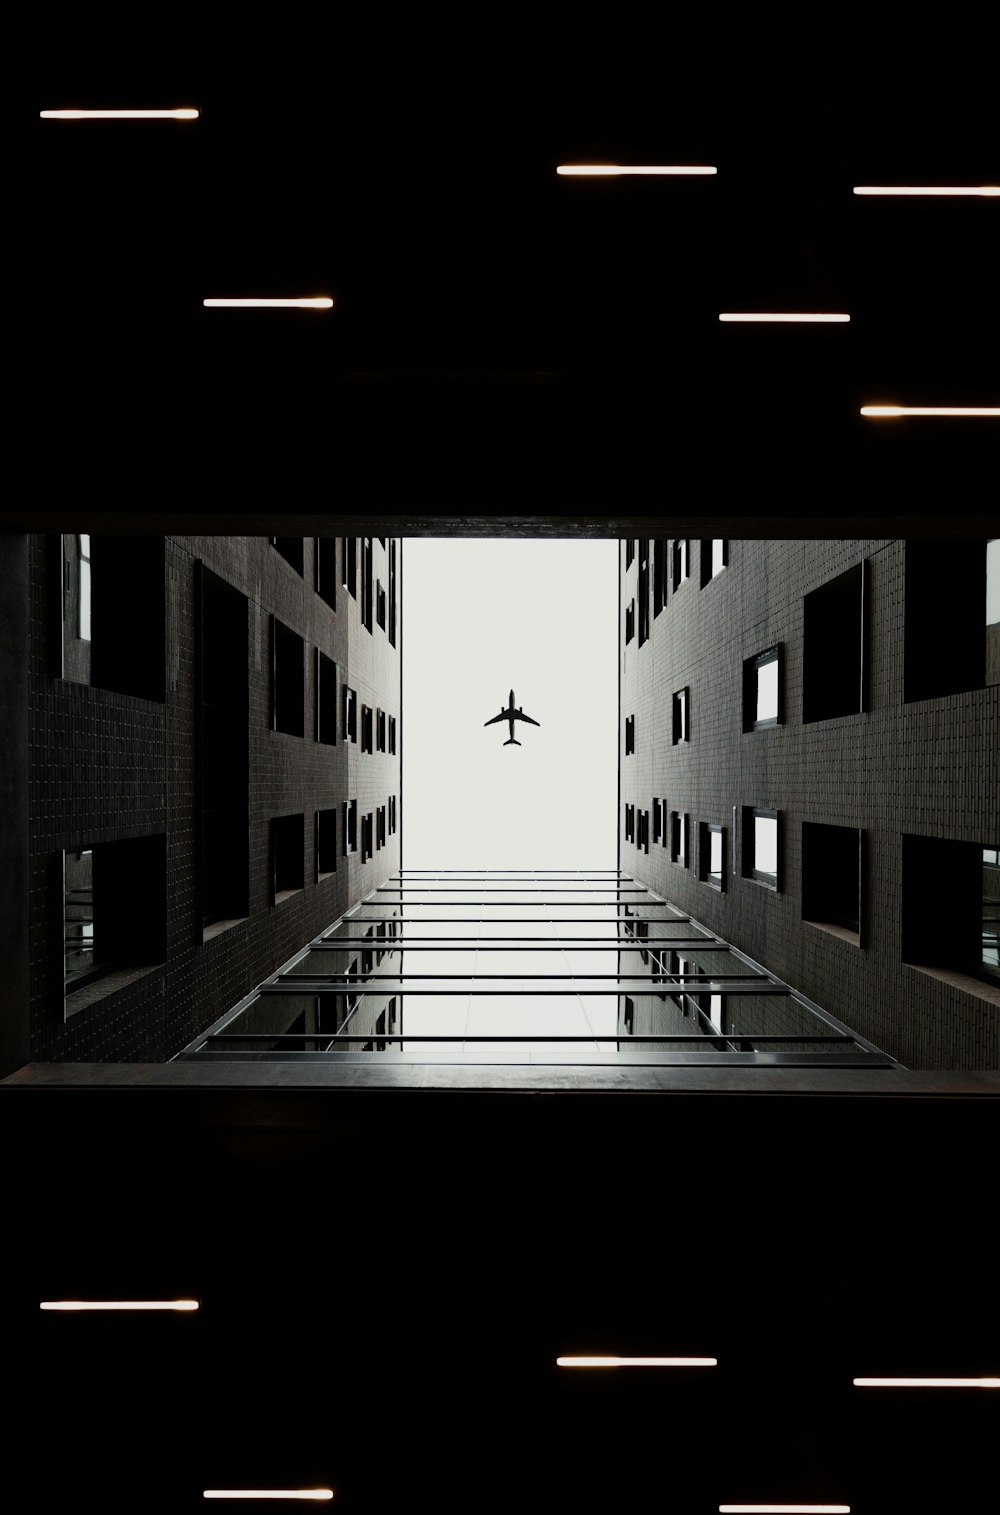 an airplane is flying through a dark building